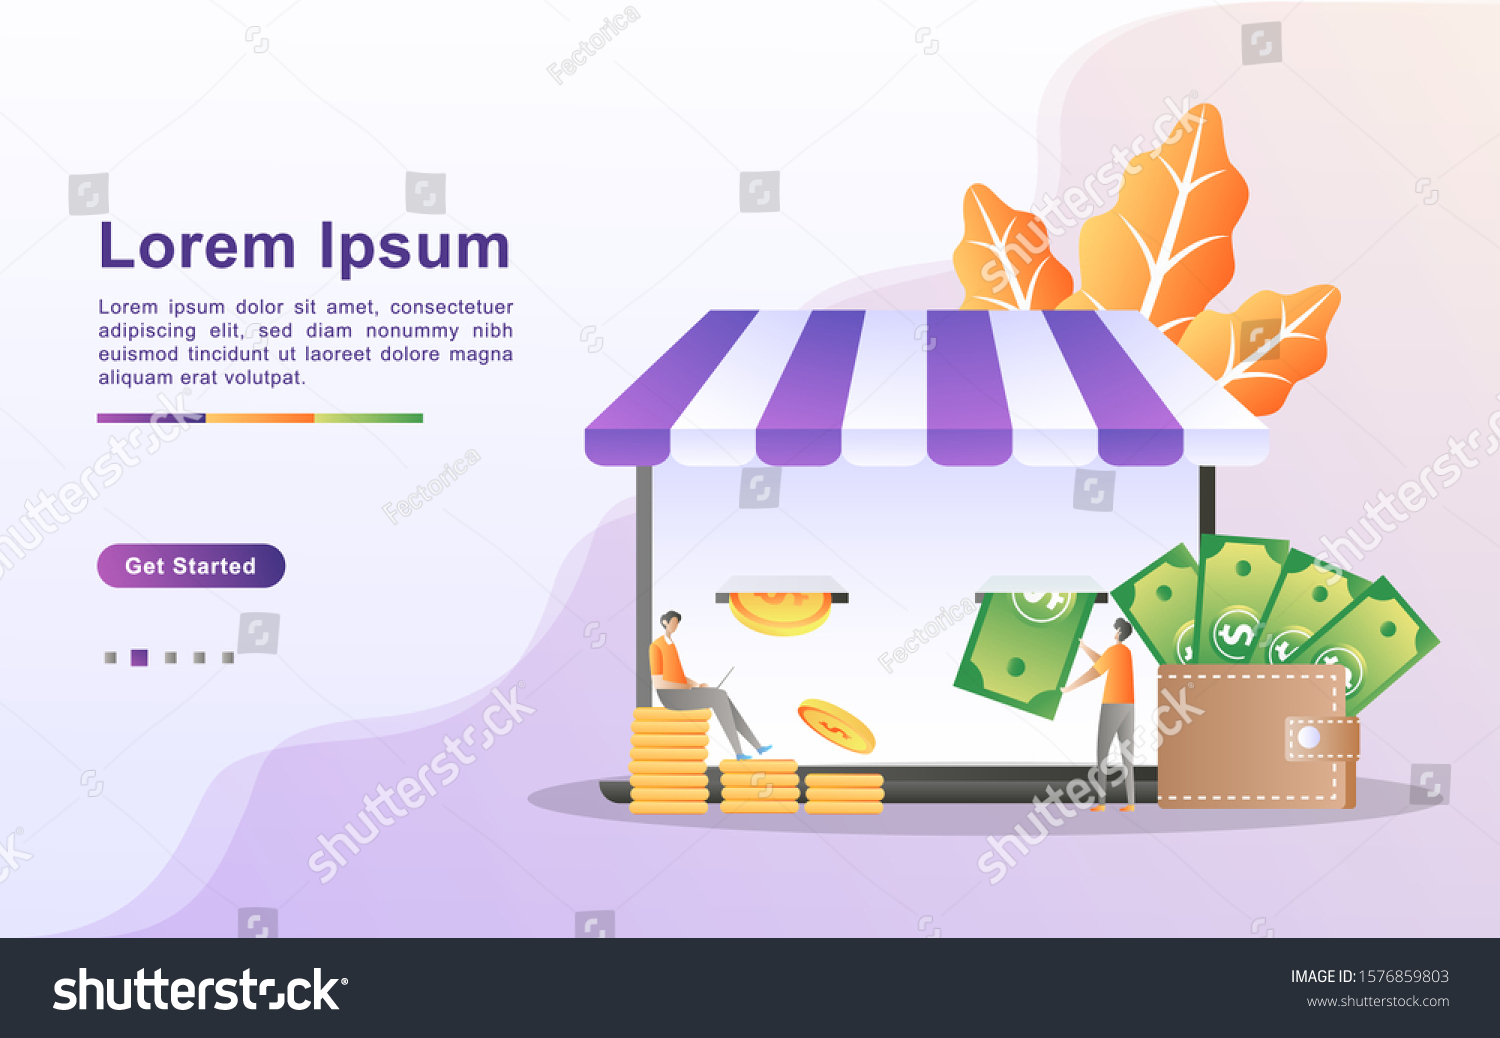 Earn Money Online Payment Concept Online Stock Vector Royalty Free 1576859803